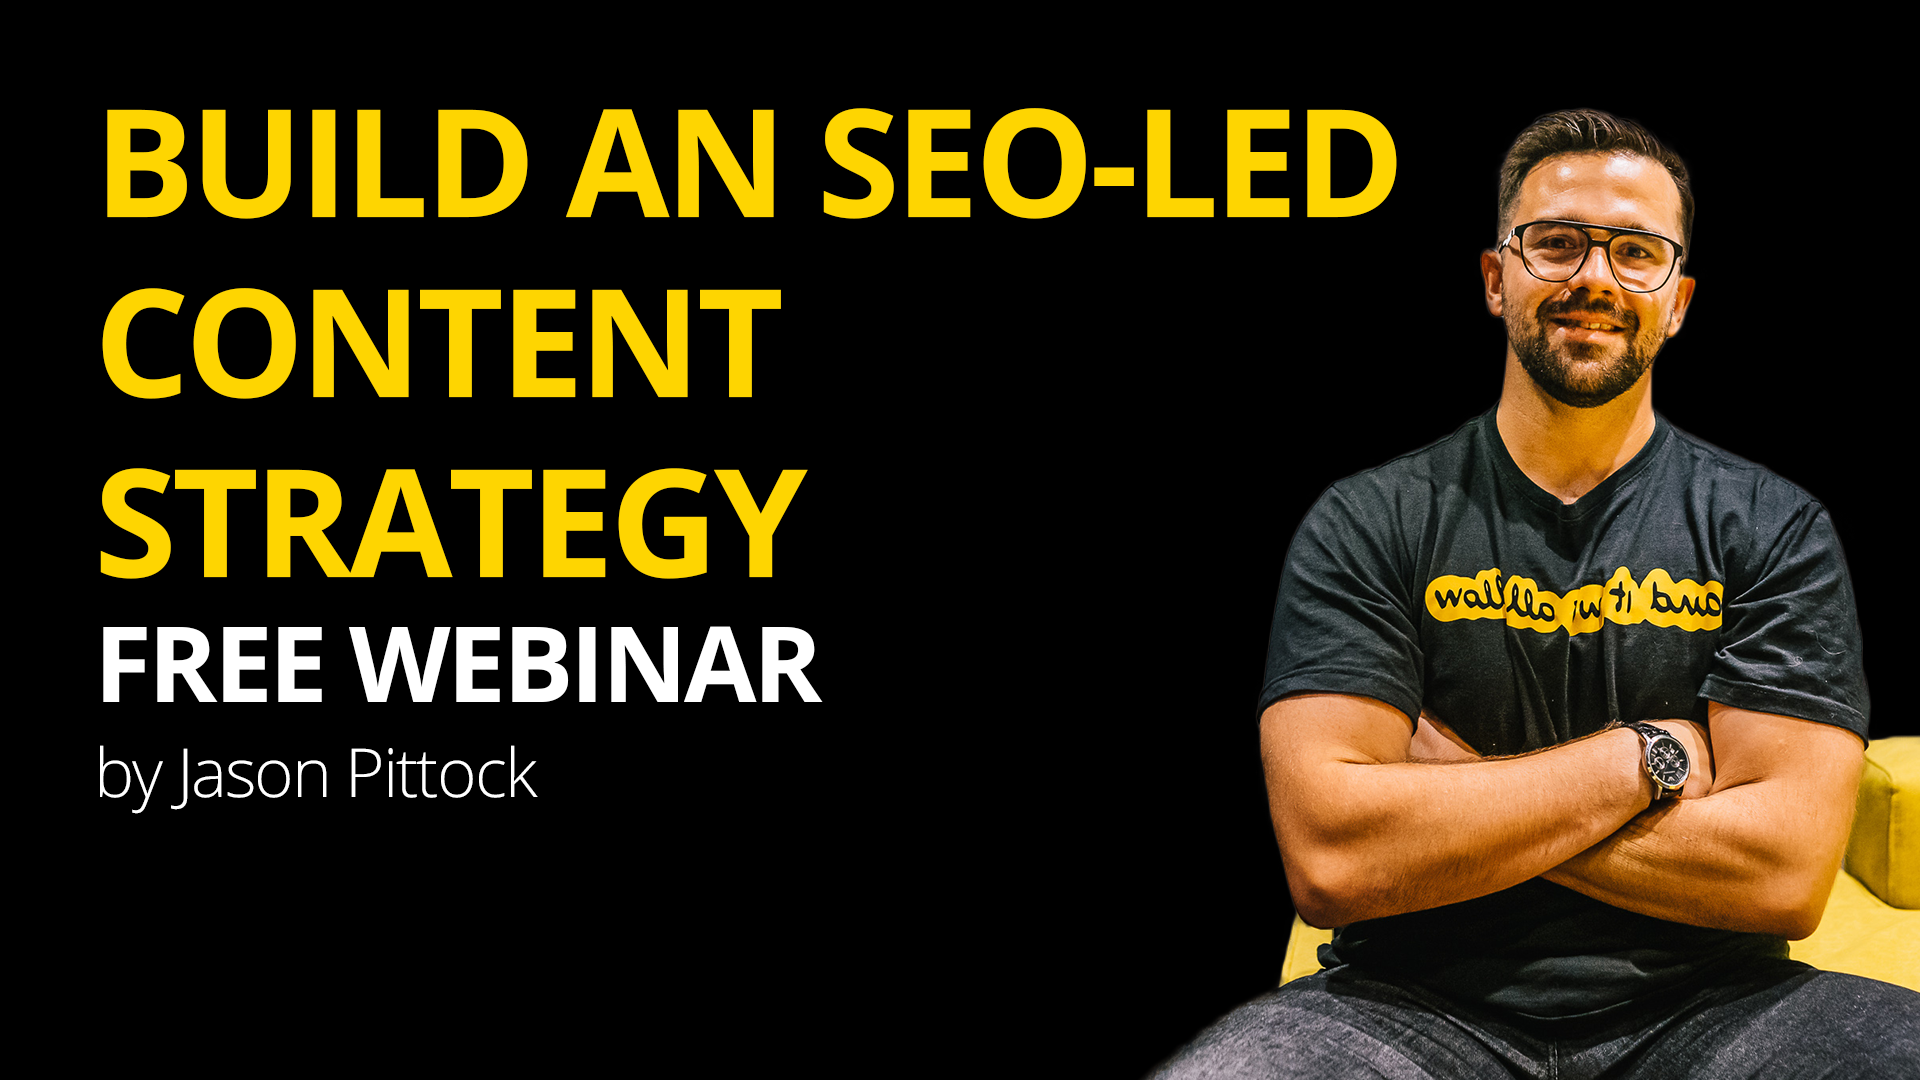 SEO-led content strategy